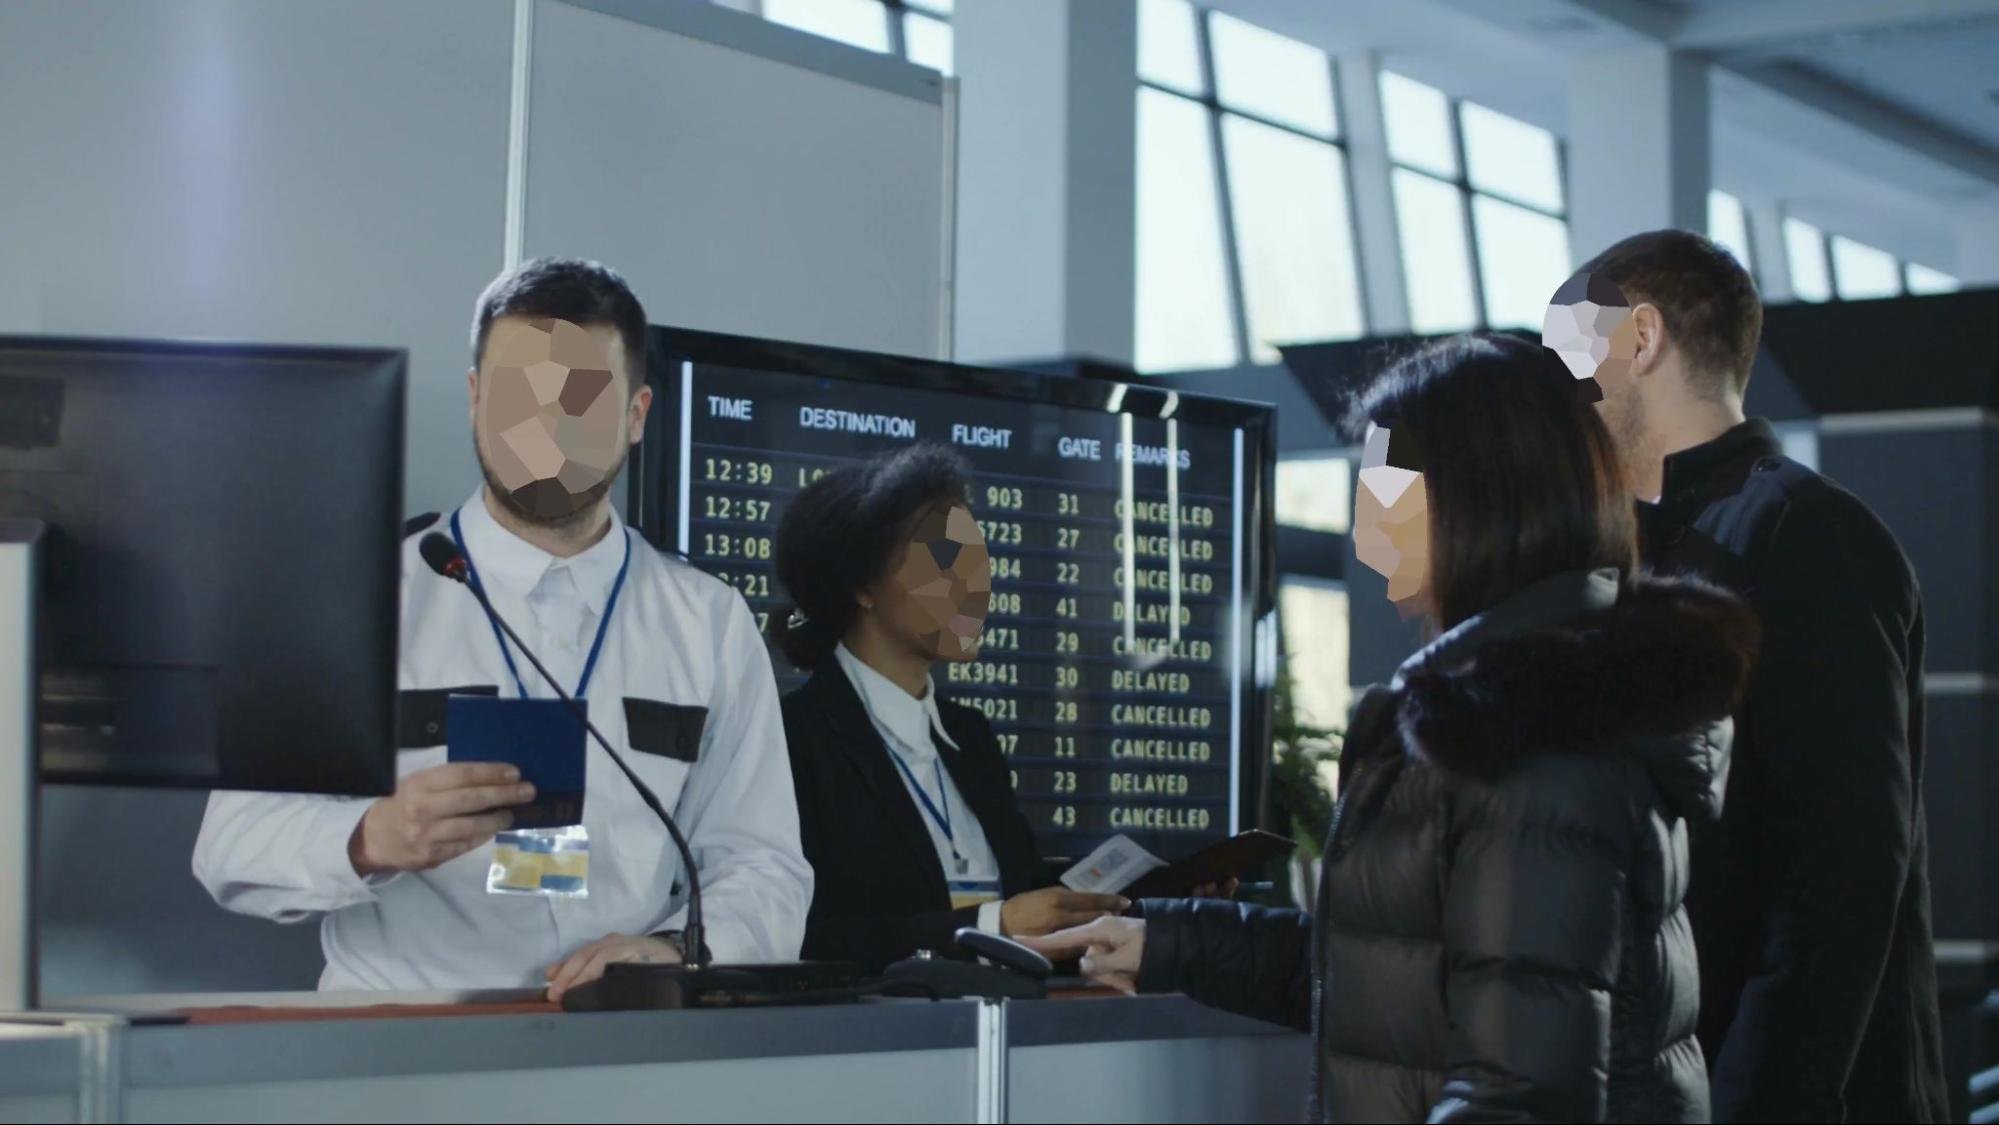 Privacy Challenges in Airport Technology